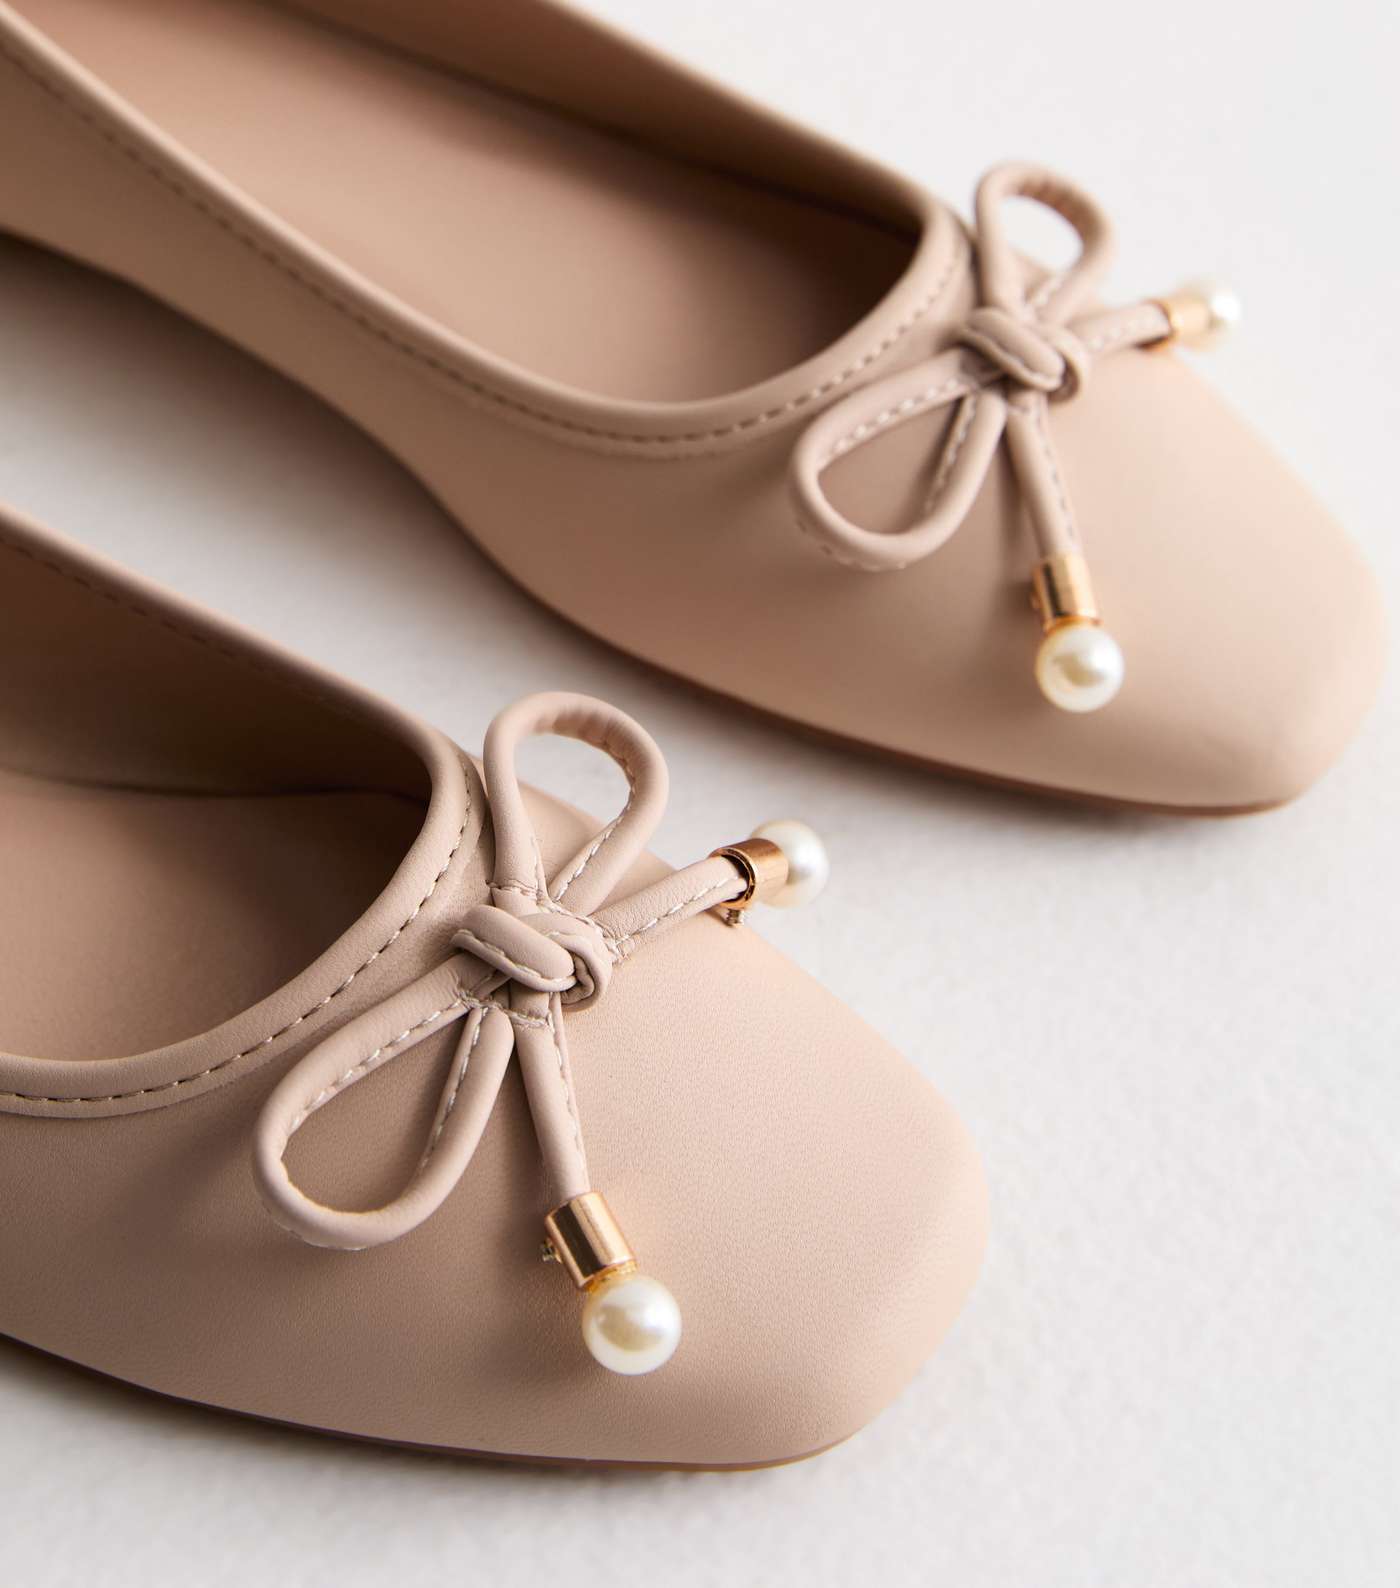 Truffle Pale Pink Faux Pearl Ballerina Pumps Image 3